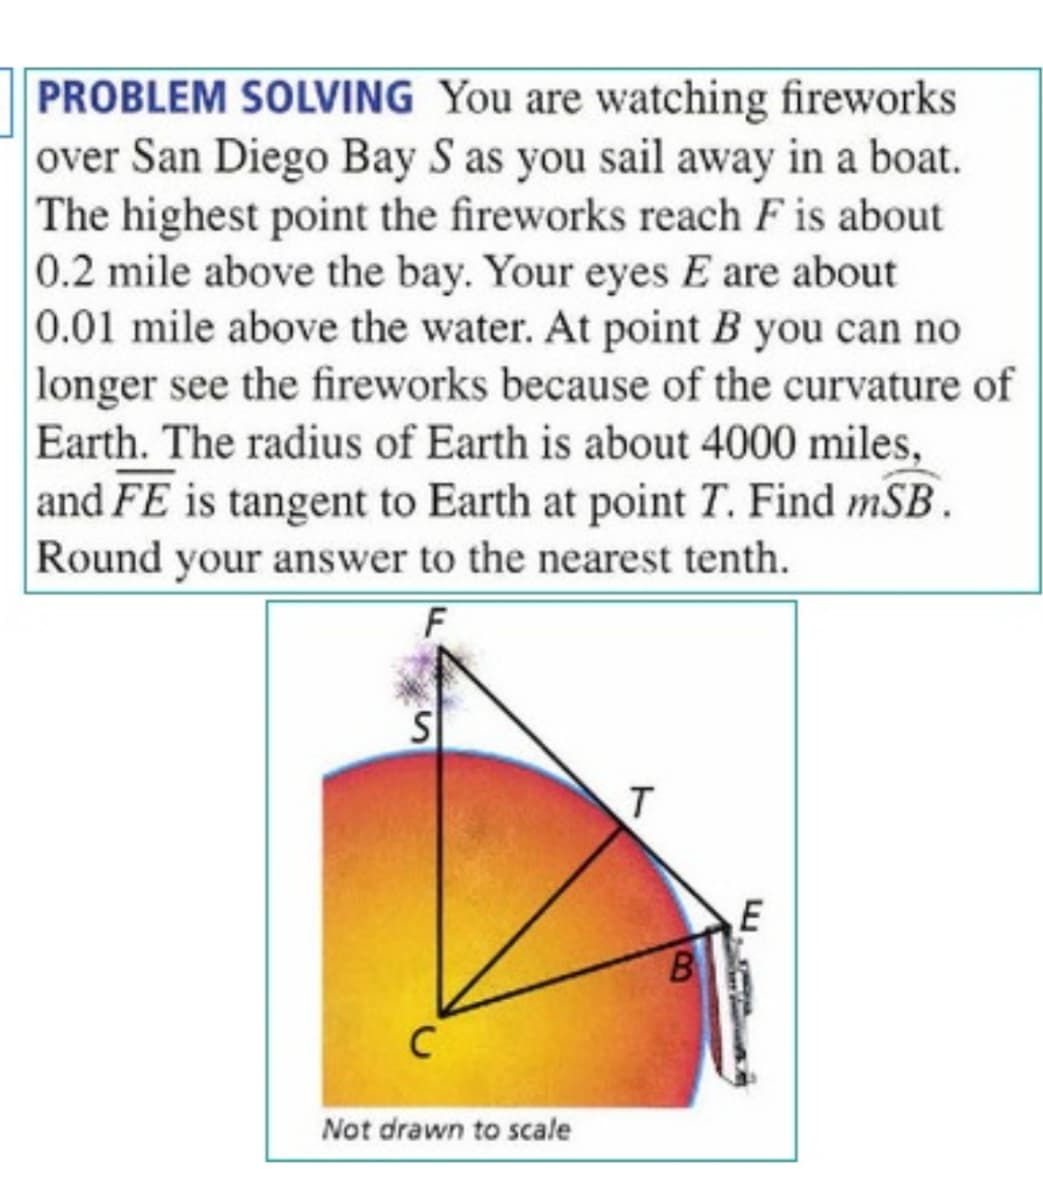 PROBLEM SOLVING You are watching fireworks
over San Diego Bay S as you sail away in a boat.
The highest point the fireworks reach F is about
0.2 mile above the bay. Your eyes E are about
0.01 mile above the water. At point B you can no
longer see the fireworks because of the curvature of
Earth. The radius of Earth is about 4000 miles,
and FE is tangent to Earth at point T. Find mSB.
Round your answer to the nearest tenth.
F
B
C
Not drawn to scale
